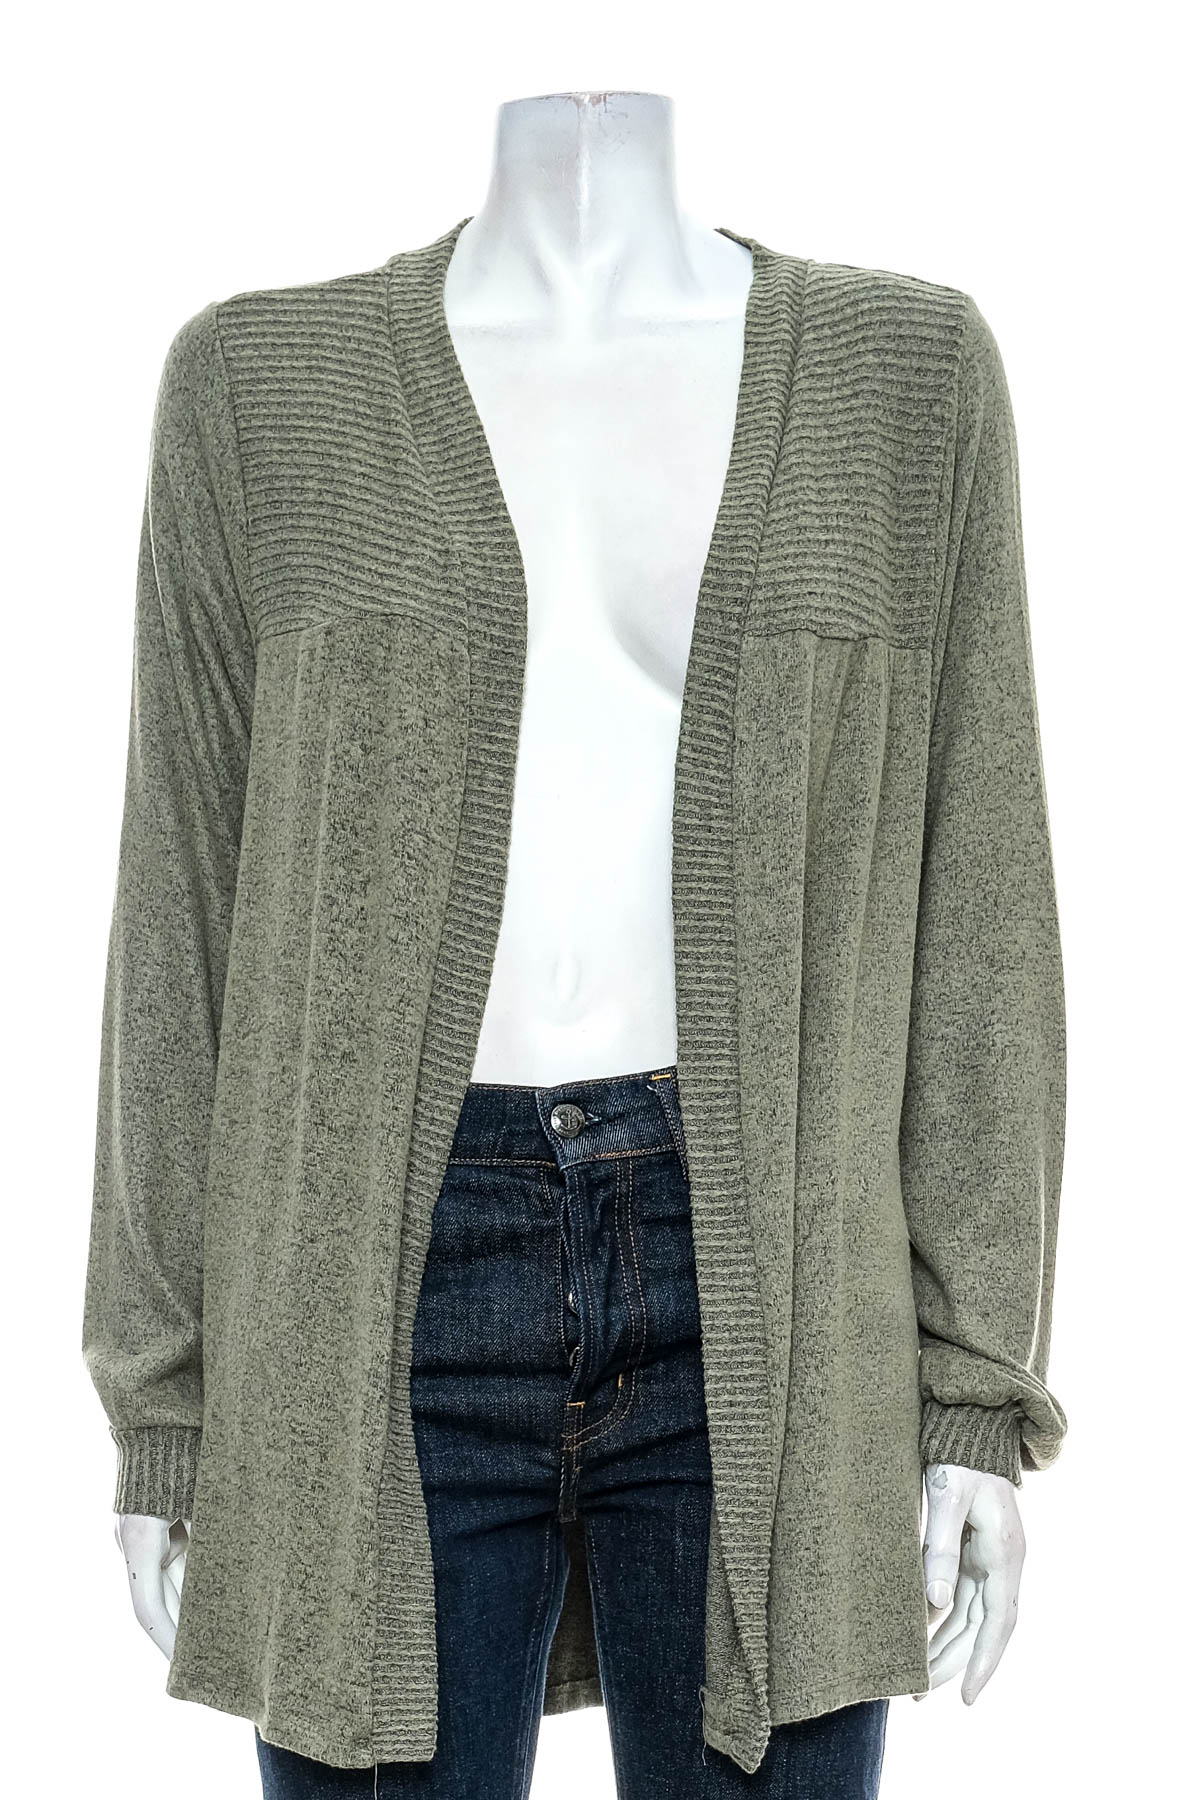 Women's cardigan - One Park Ave - 0